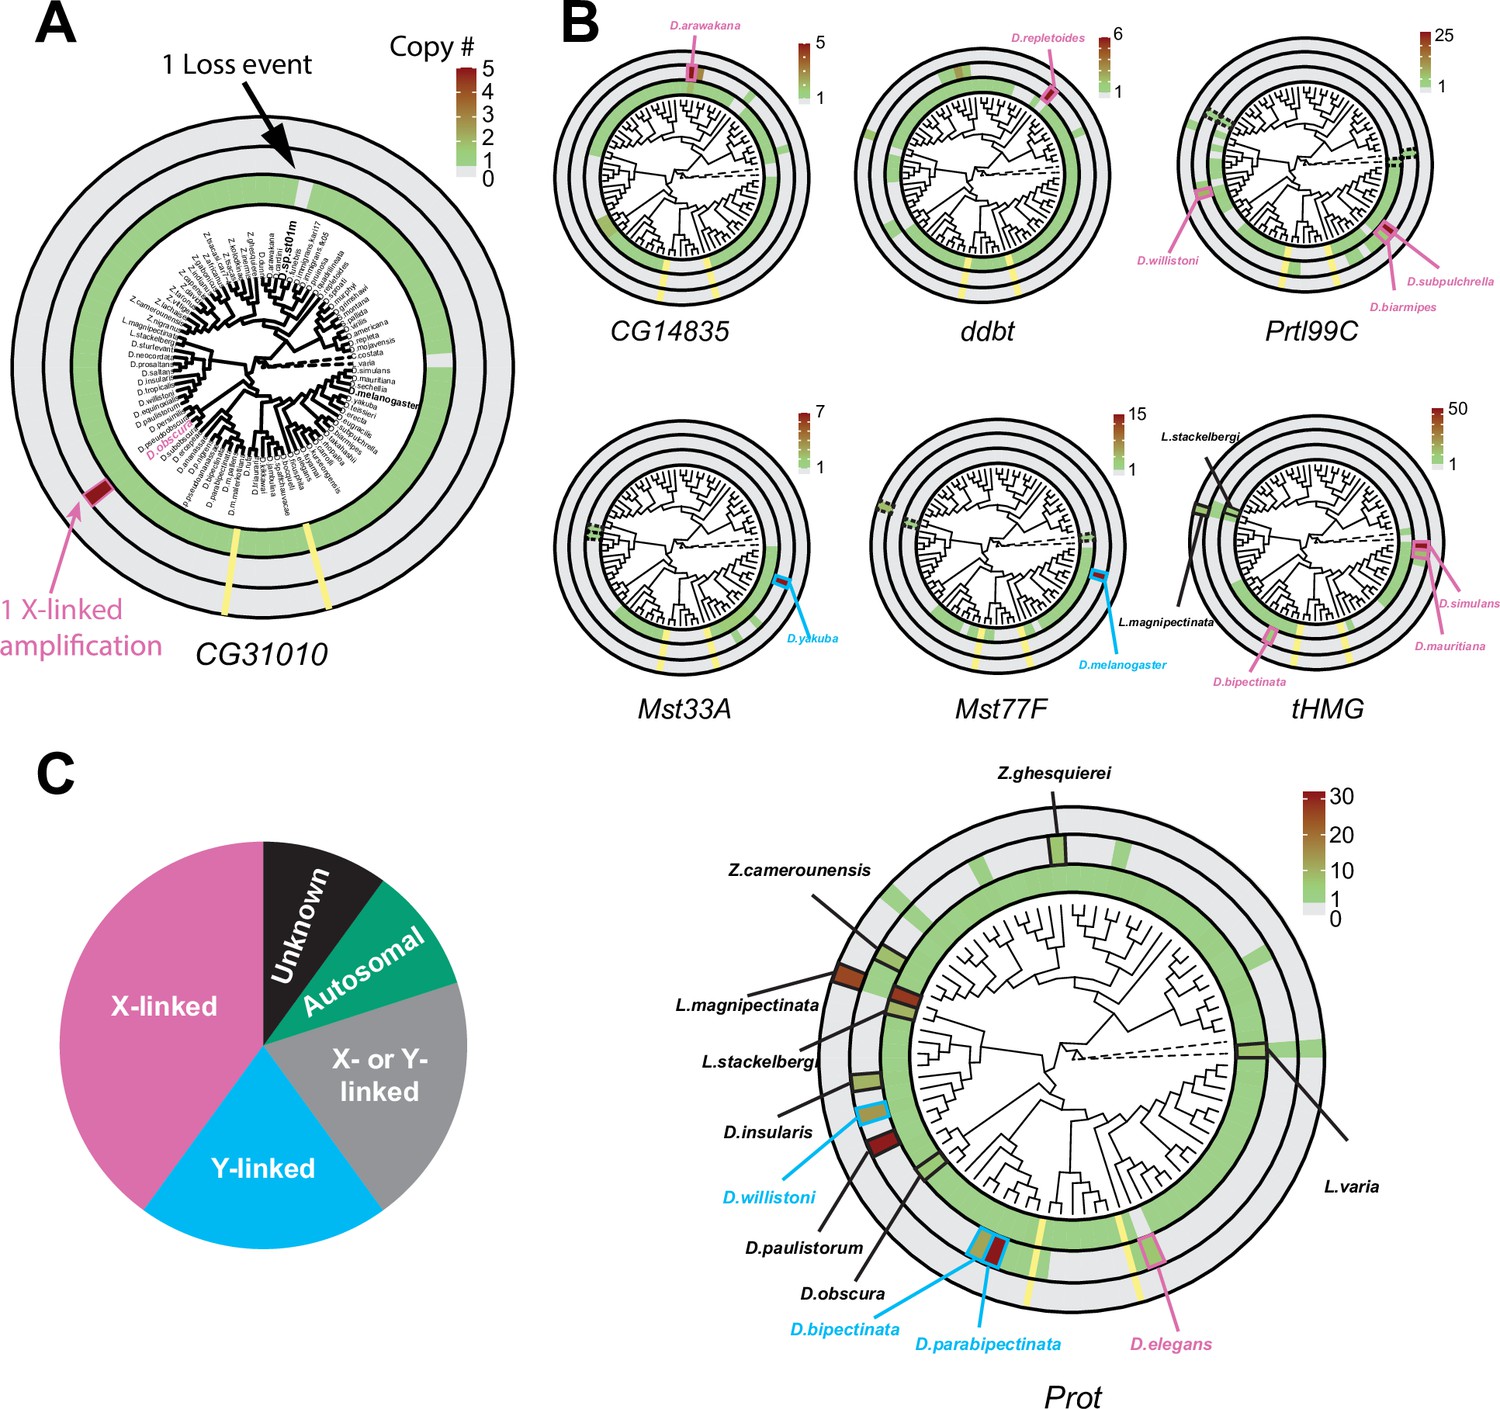 Won for All: How the Drosophila Genome Was Sequenced